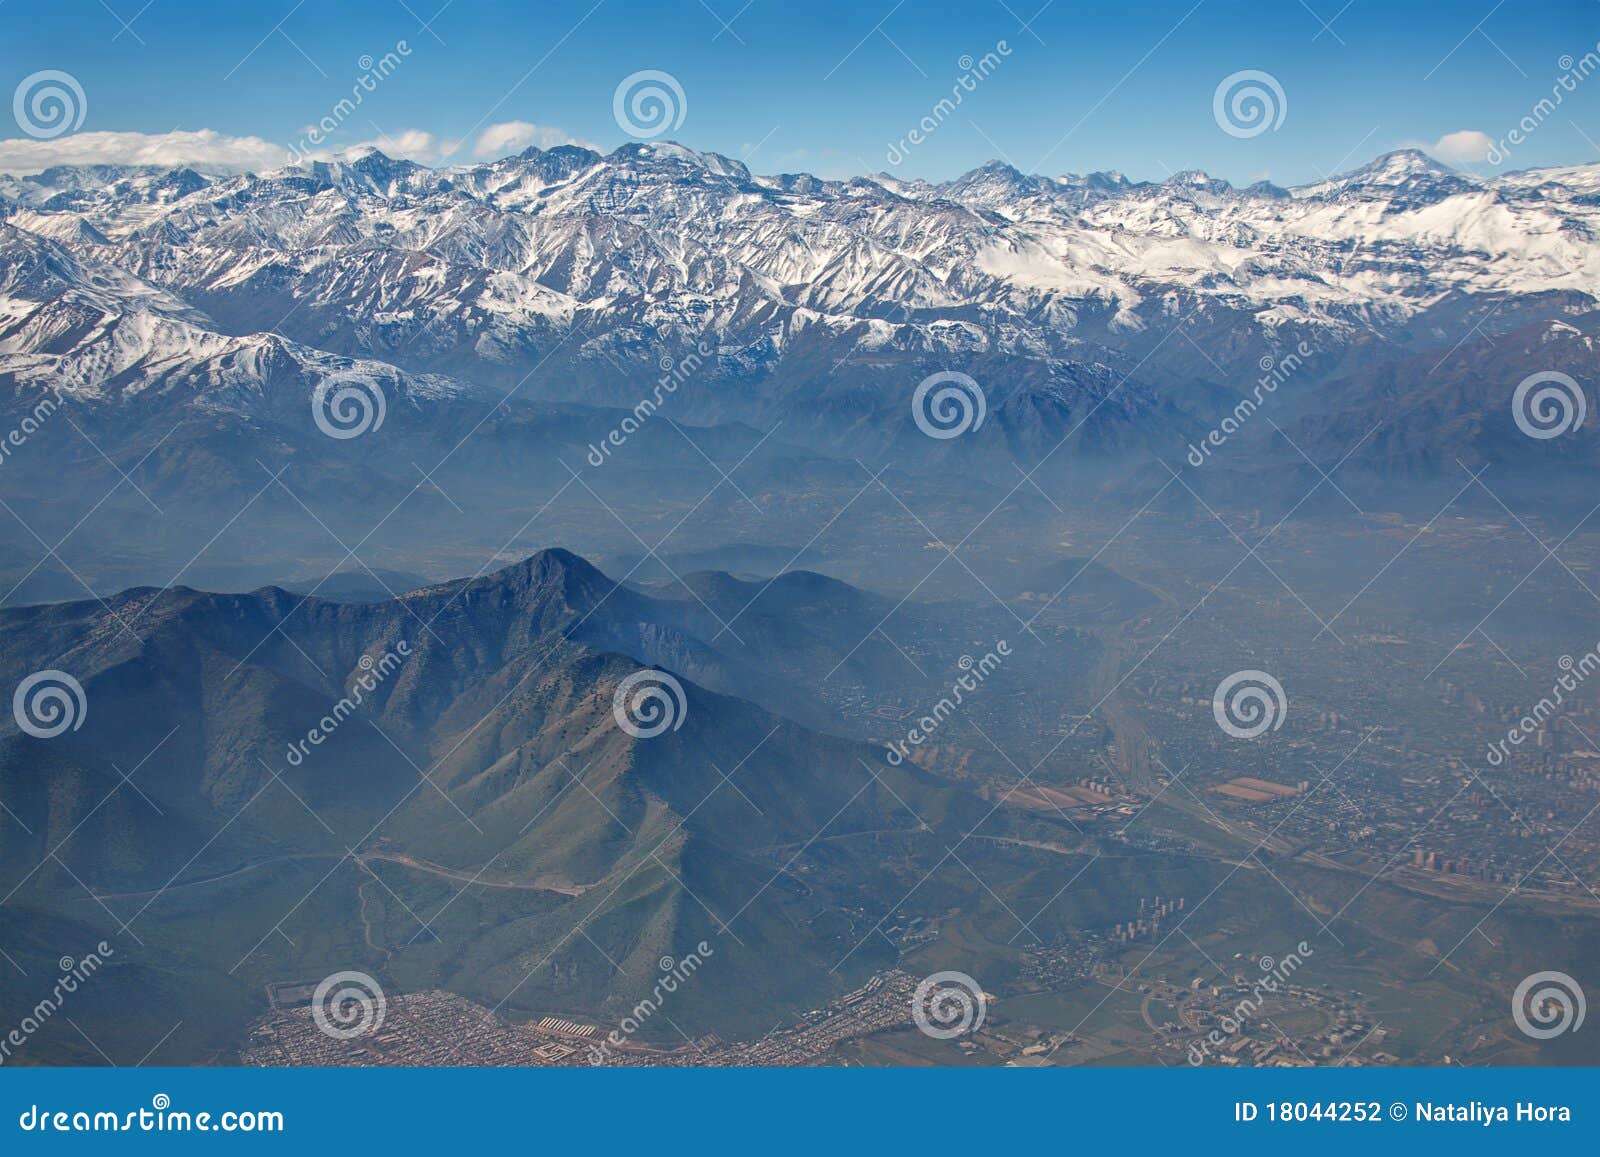 andes and santiago with smog, chile